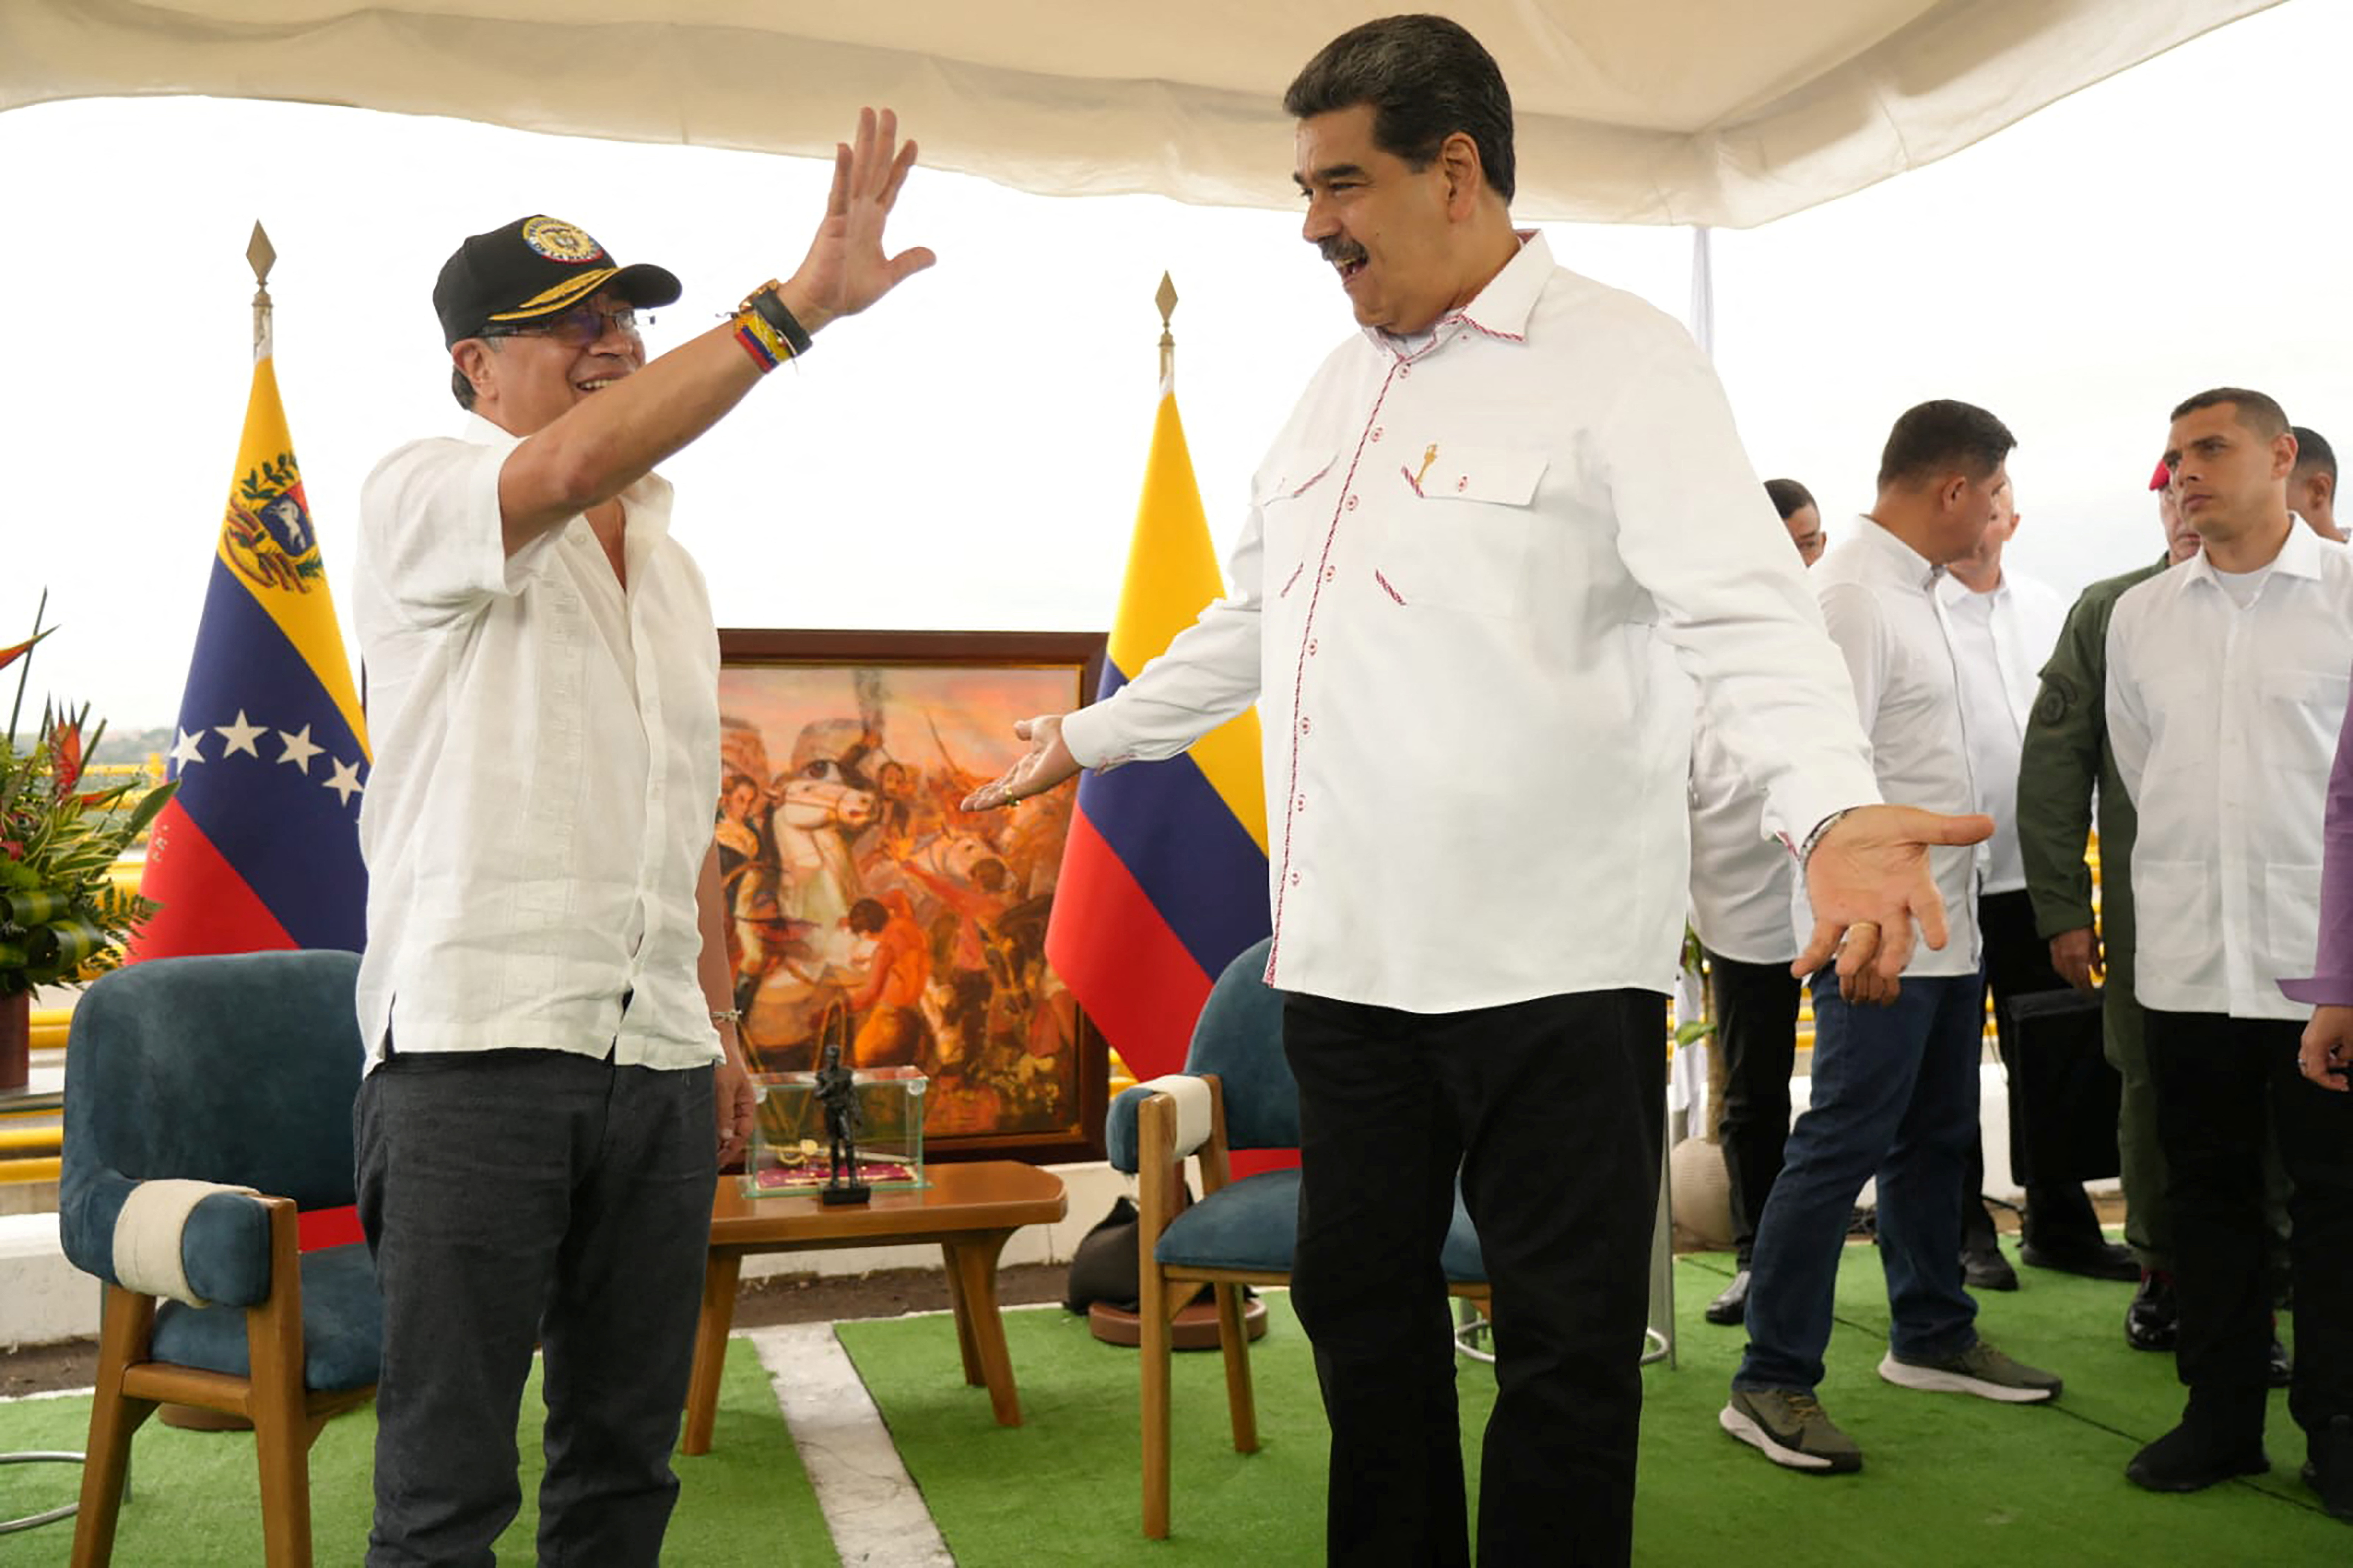 Colombian President Gustavo Petro waves as Venezuelan President Nicolas Maduro reacts during a meeting for signing the Partial Scope Agreement Number 28 that will resume bilateral trade between Colombia and Venezuela at the Atanasio Girardot International Bridge on the border between Colombia and Venezuela, in San Antonio del Tachira, Venezuela, February 16, 2023. Colombian Presidency/Handout via REUTERS ATTENTION EDITORS - THIS IMAGE WAS PROVIDED BY A THIRD PARTY. NO RESALES. NO ARCHIVES. MANDATORY CREDIT.